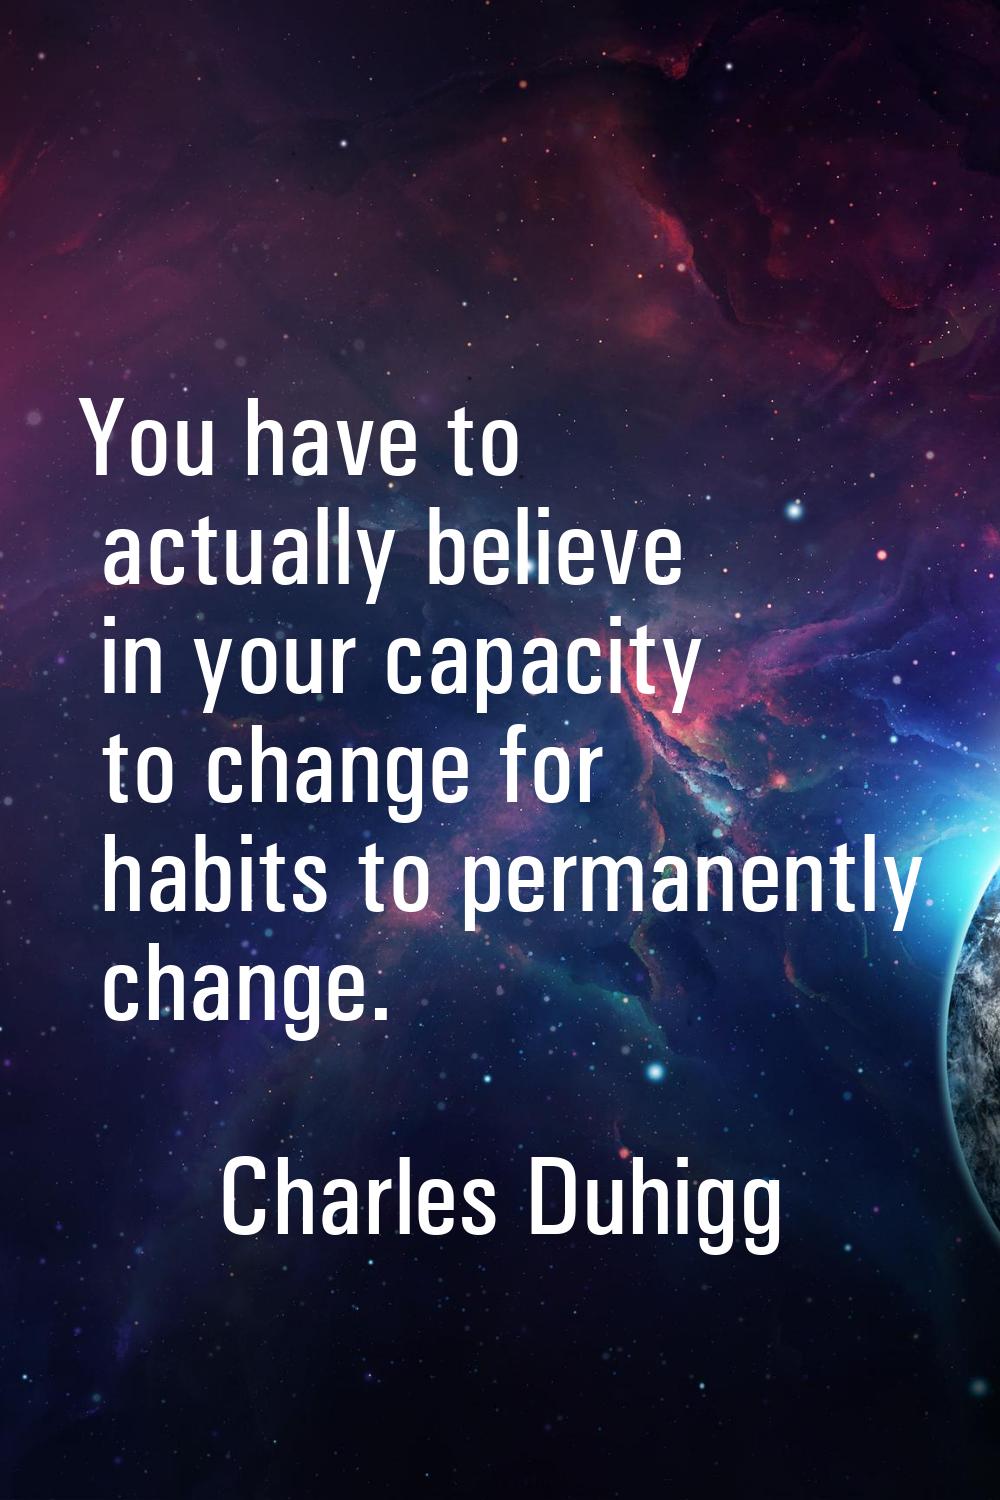 You have to actually believe in your capacity to change for habits to permanently change.